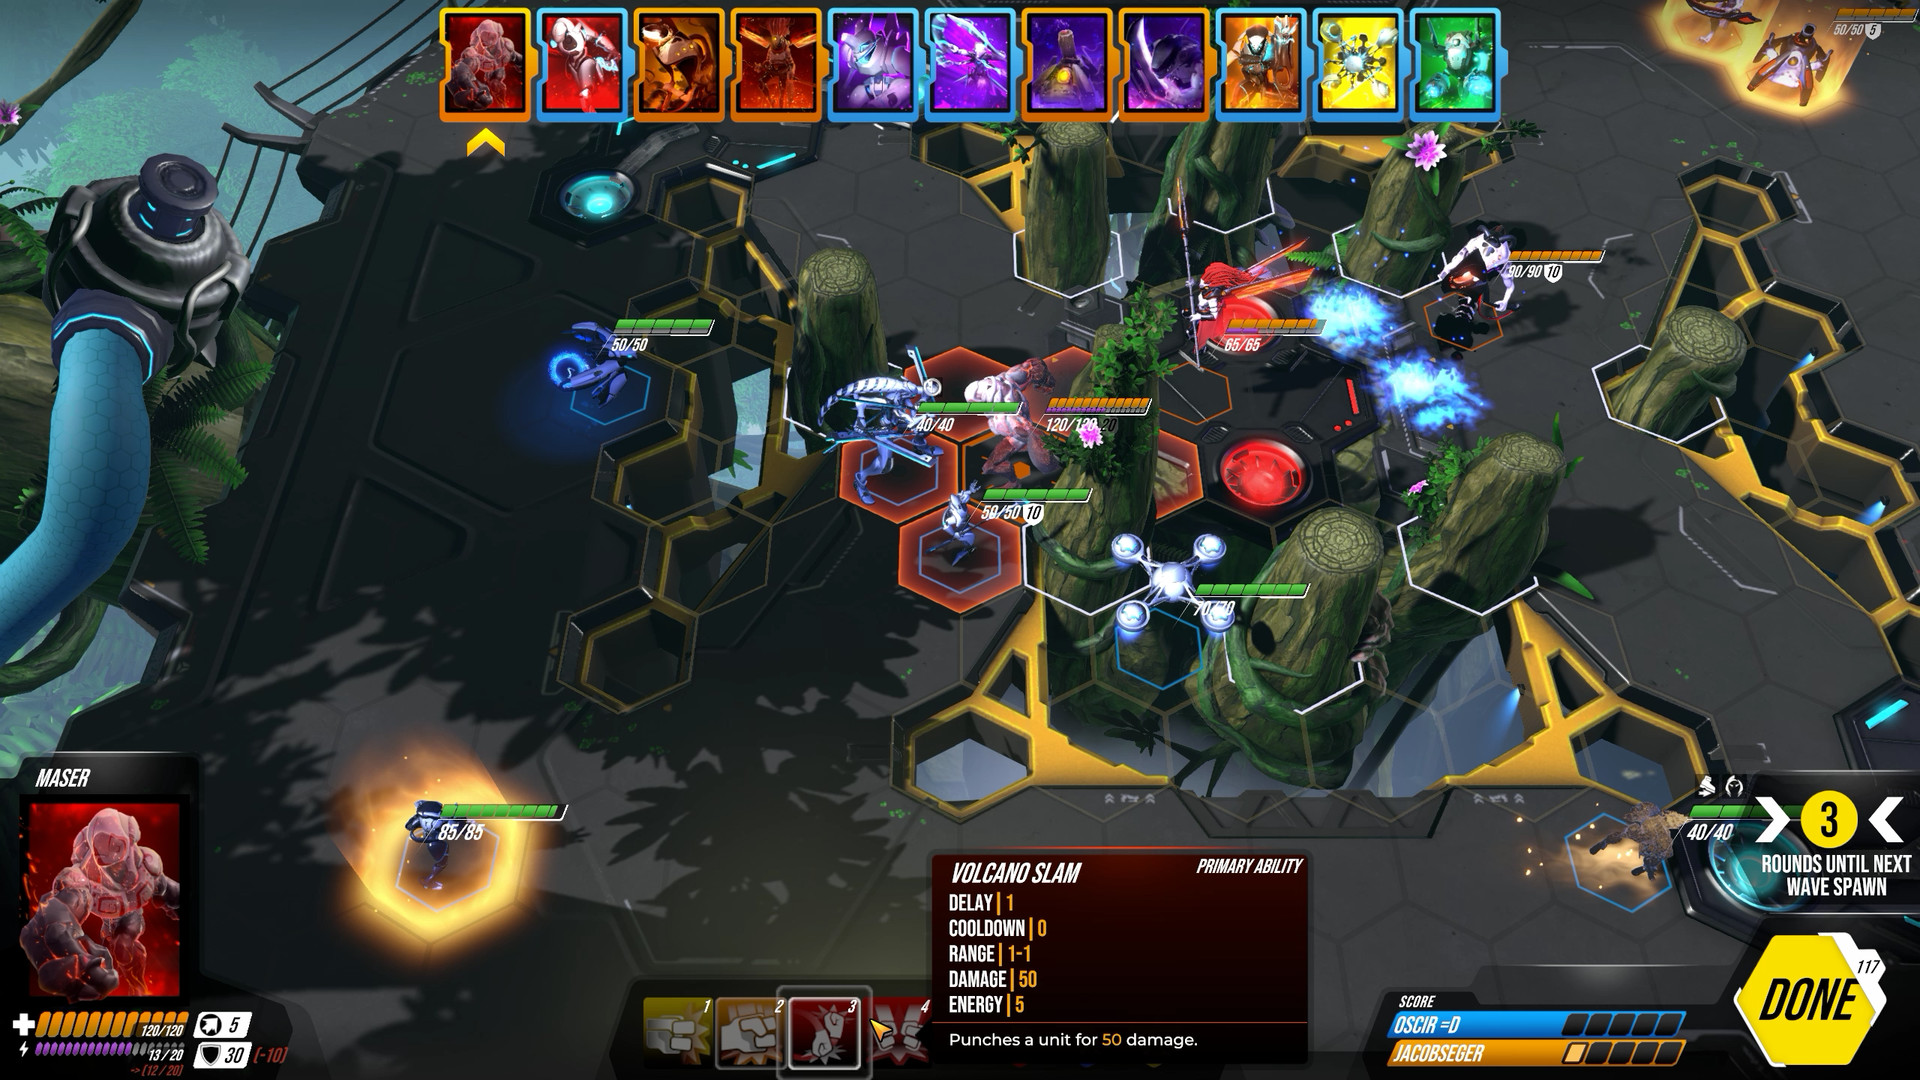 Online turn-based strategy game Batalj out on PC - The Indie Game Website